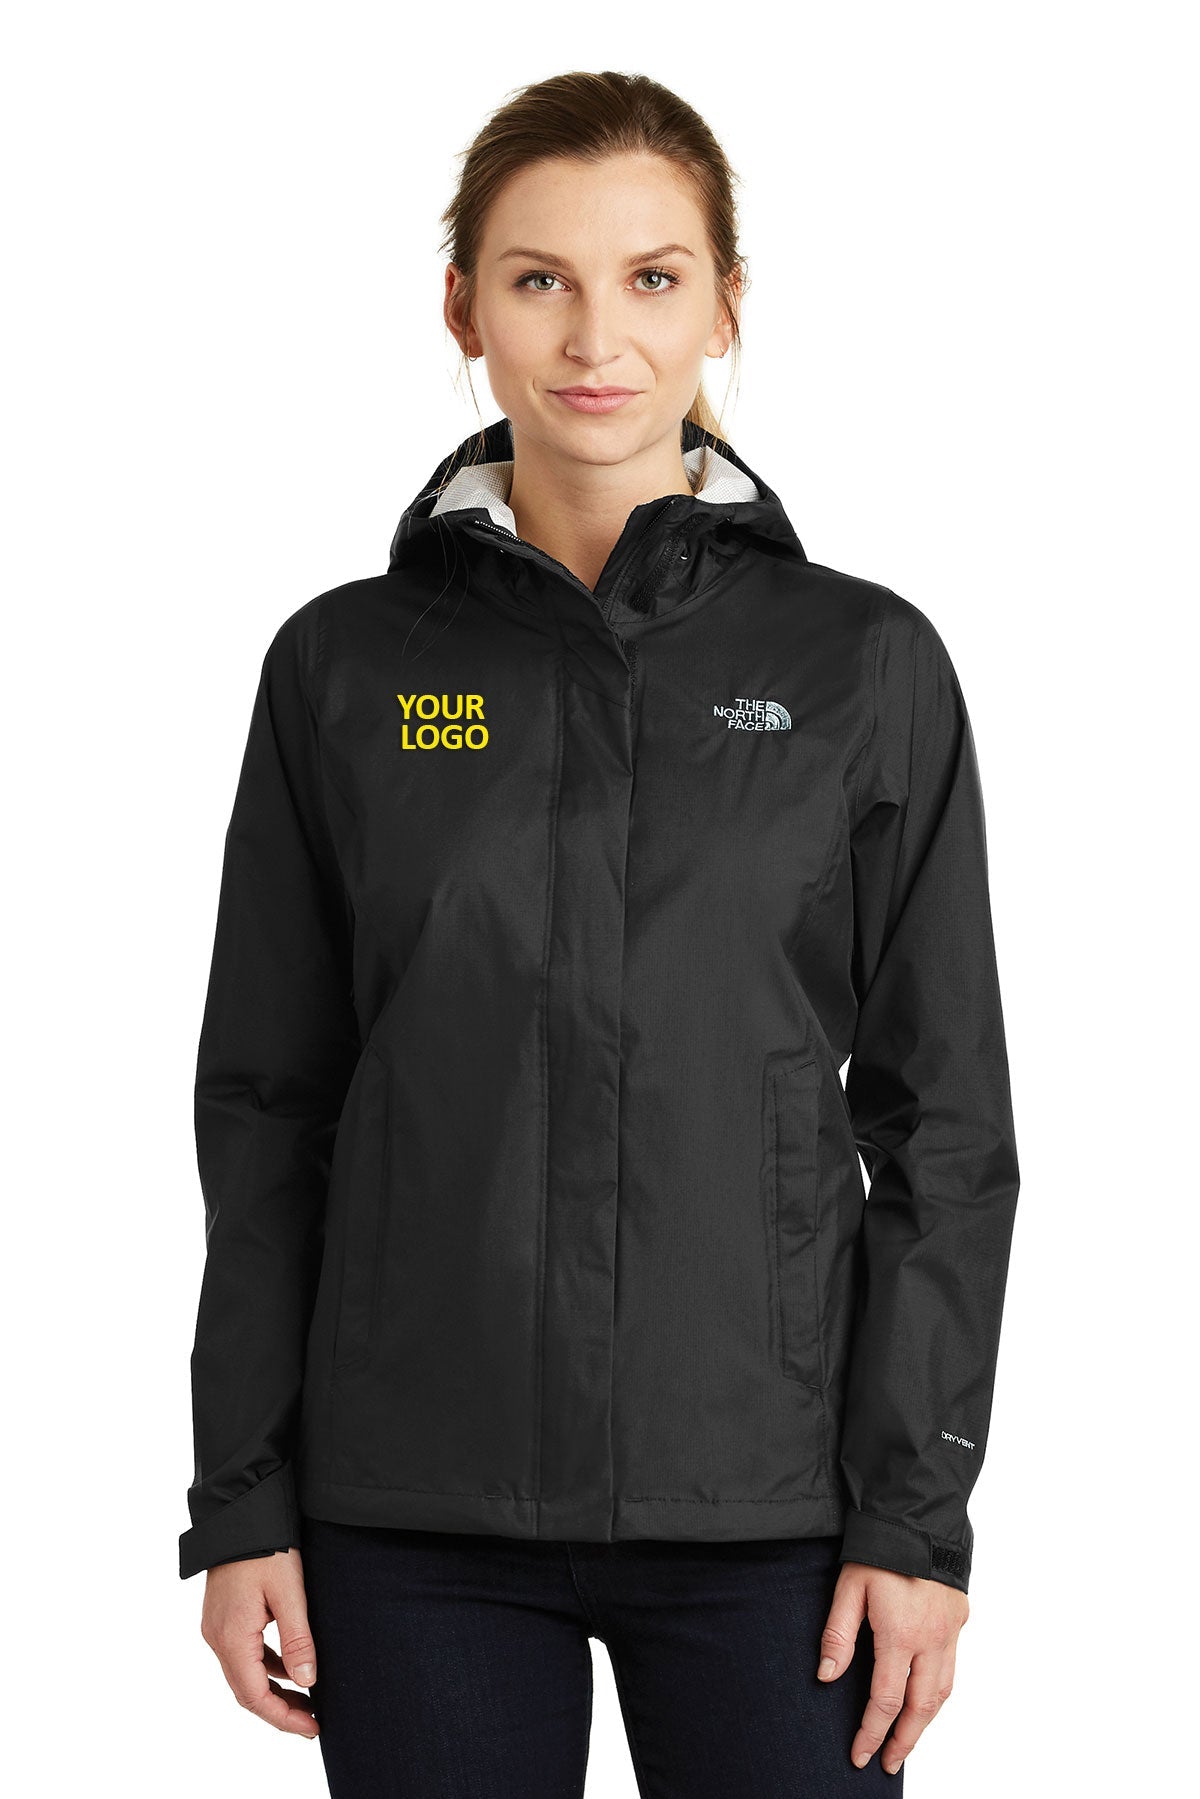 The North Face TNF Black NF0A3LH5 business jackets with logo